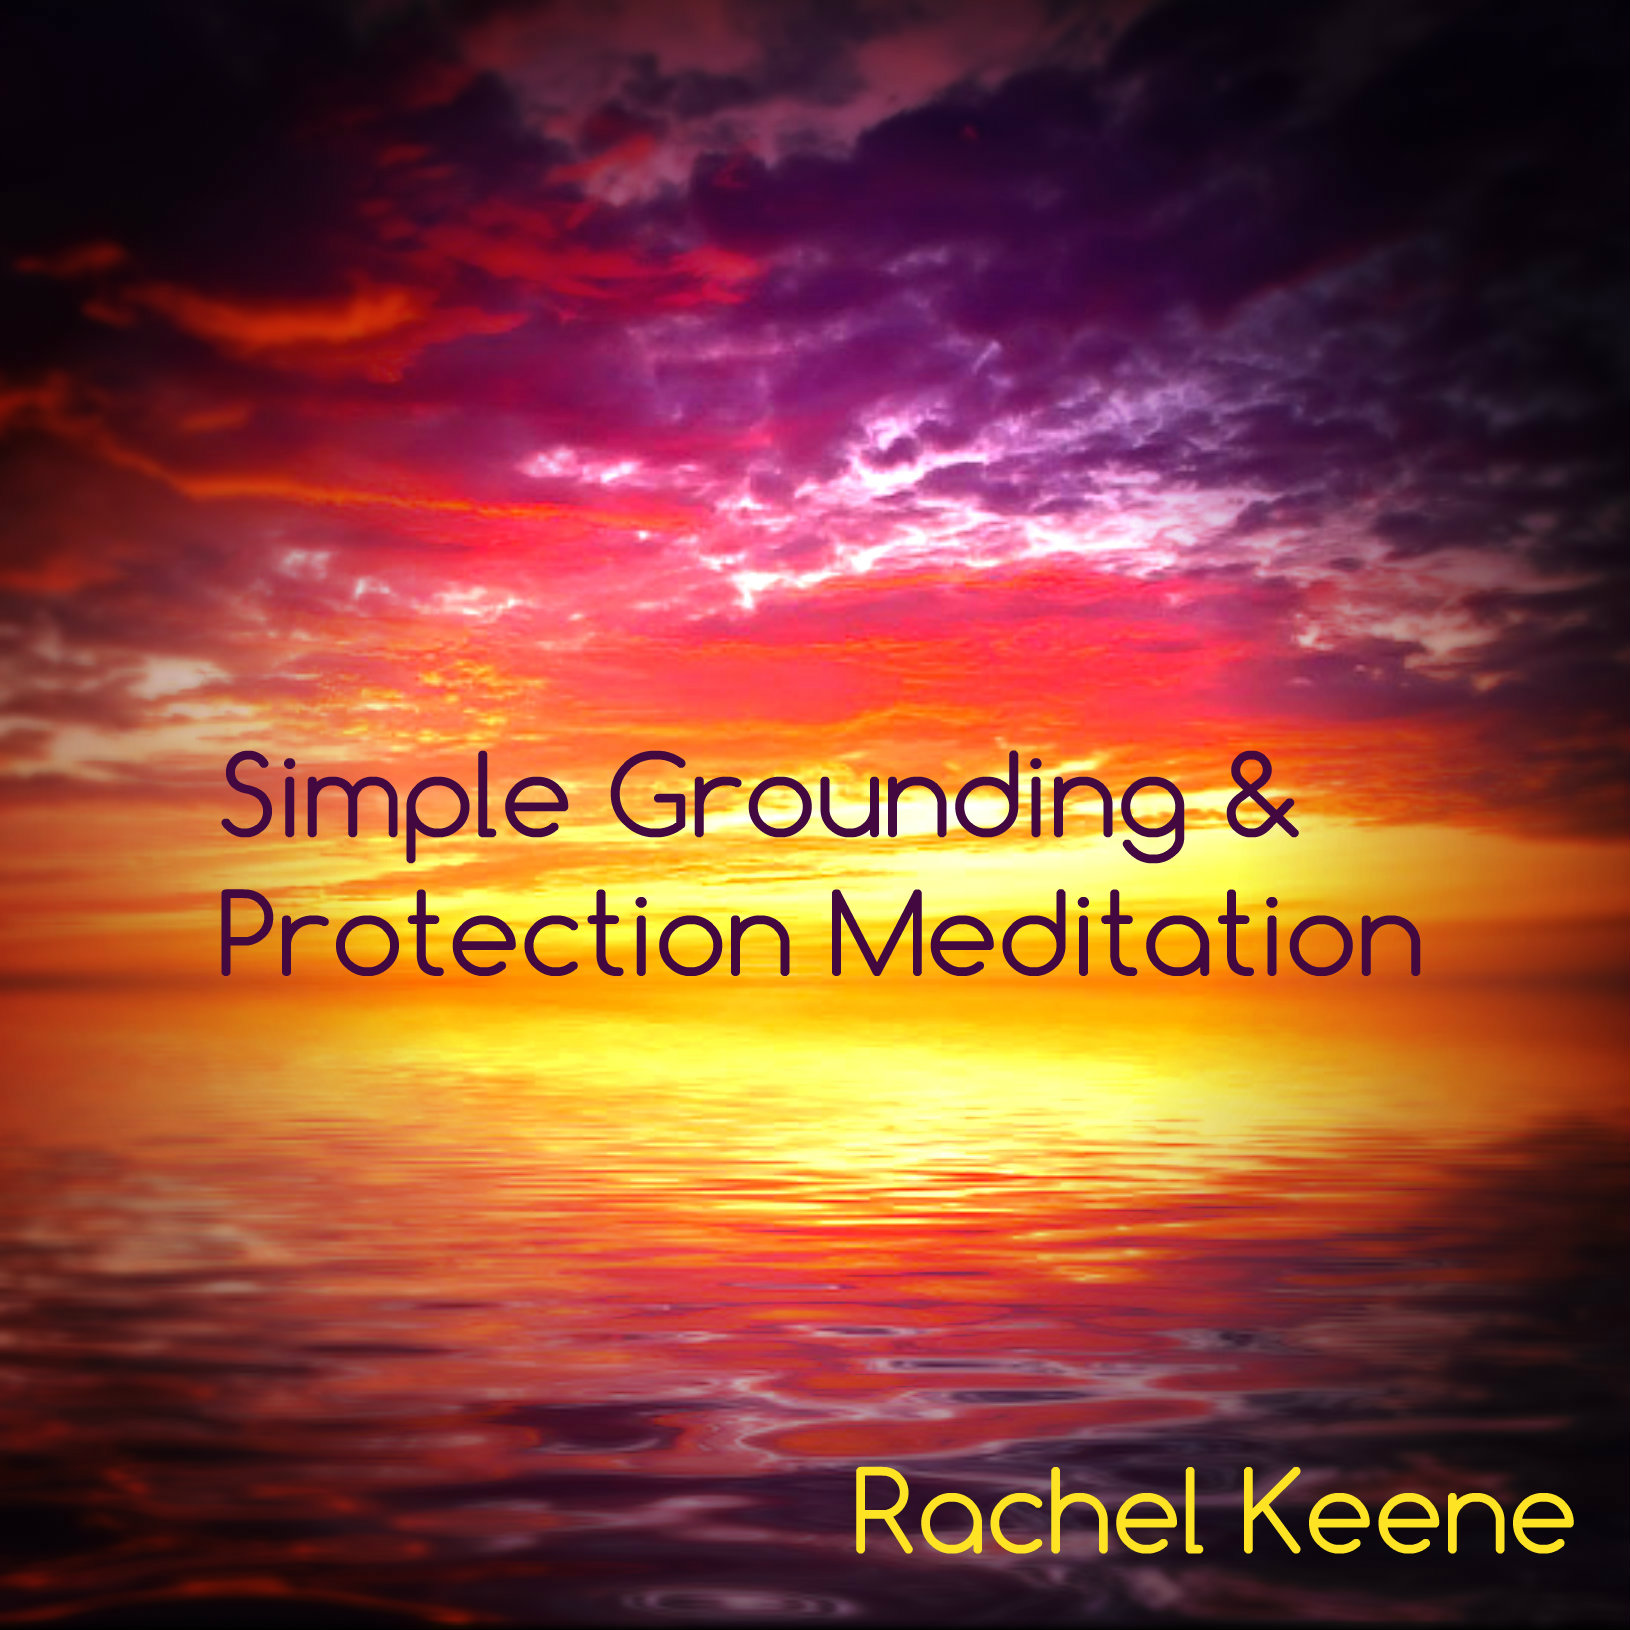 Simple Grounding & Protection Meditation